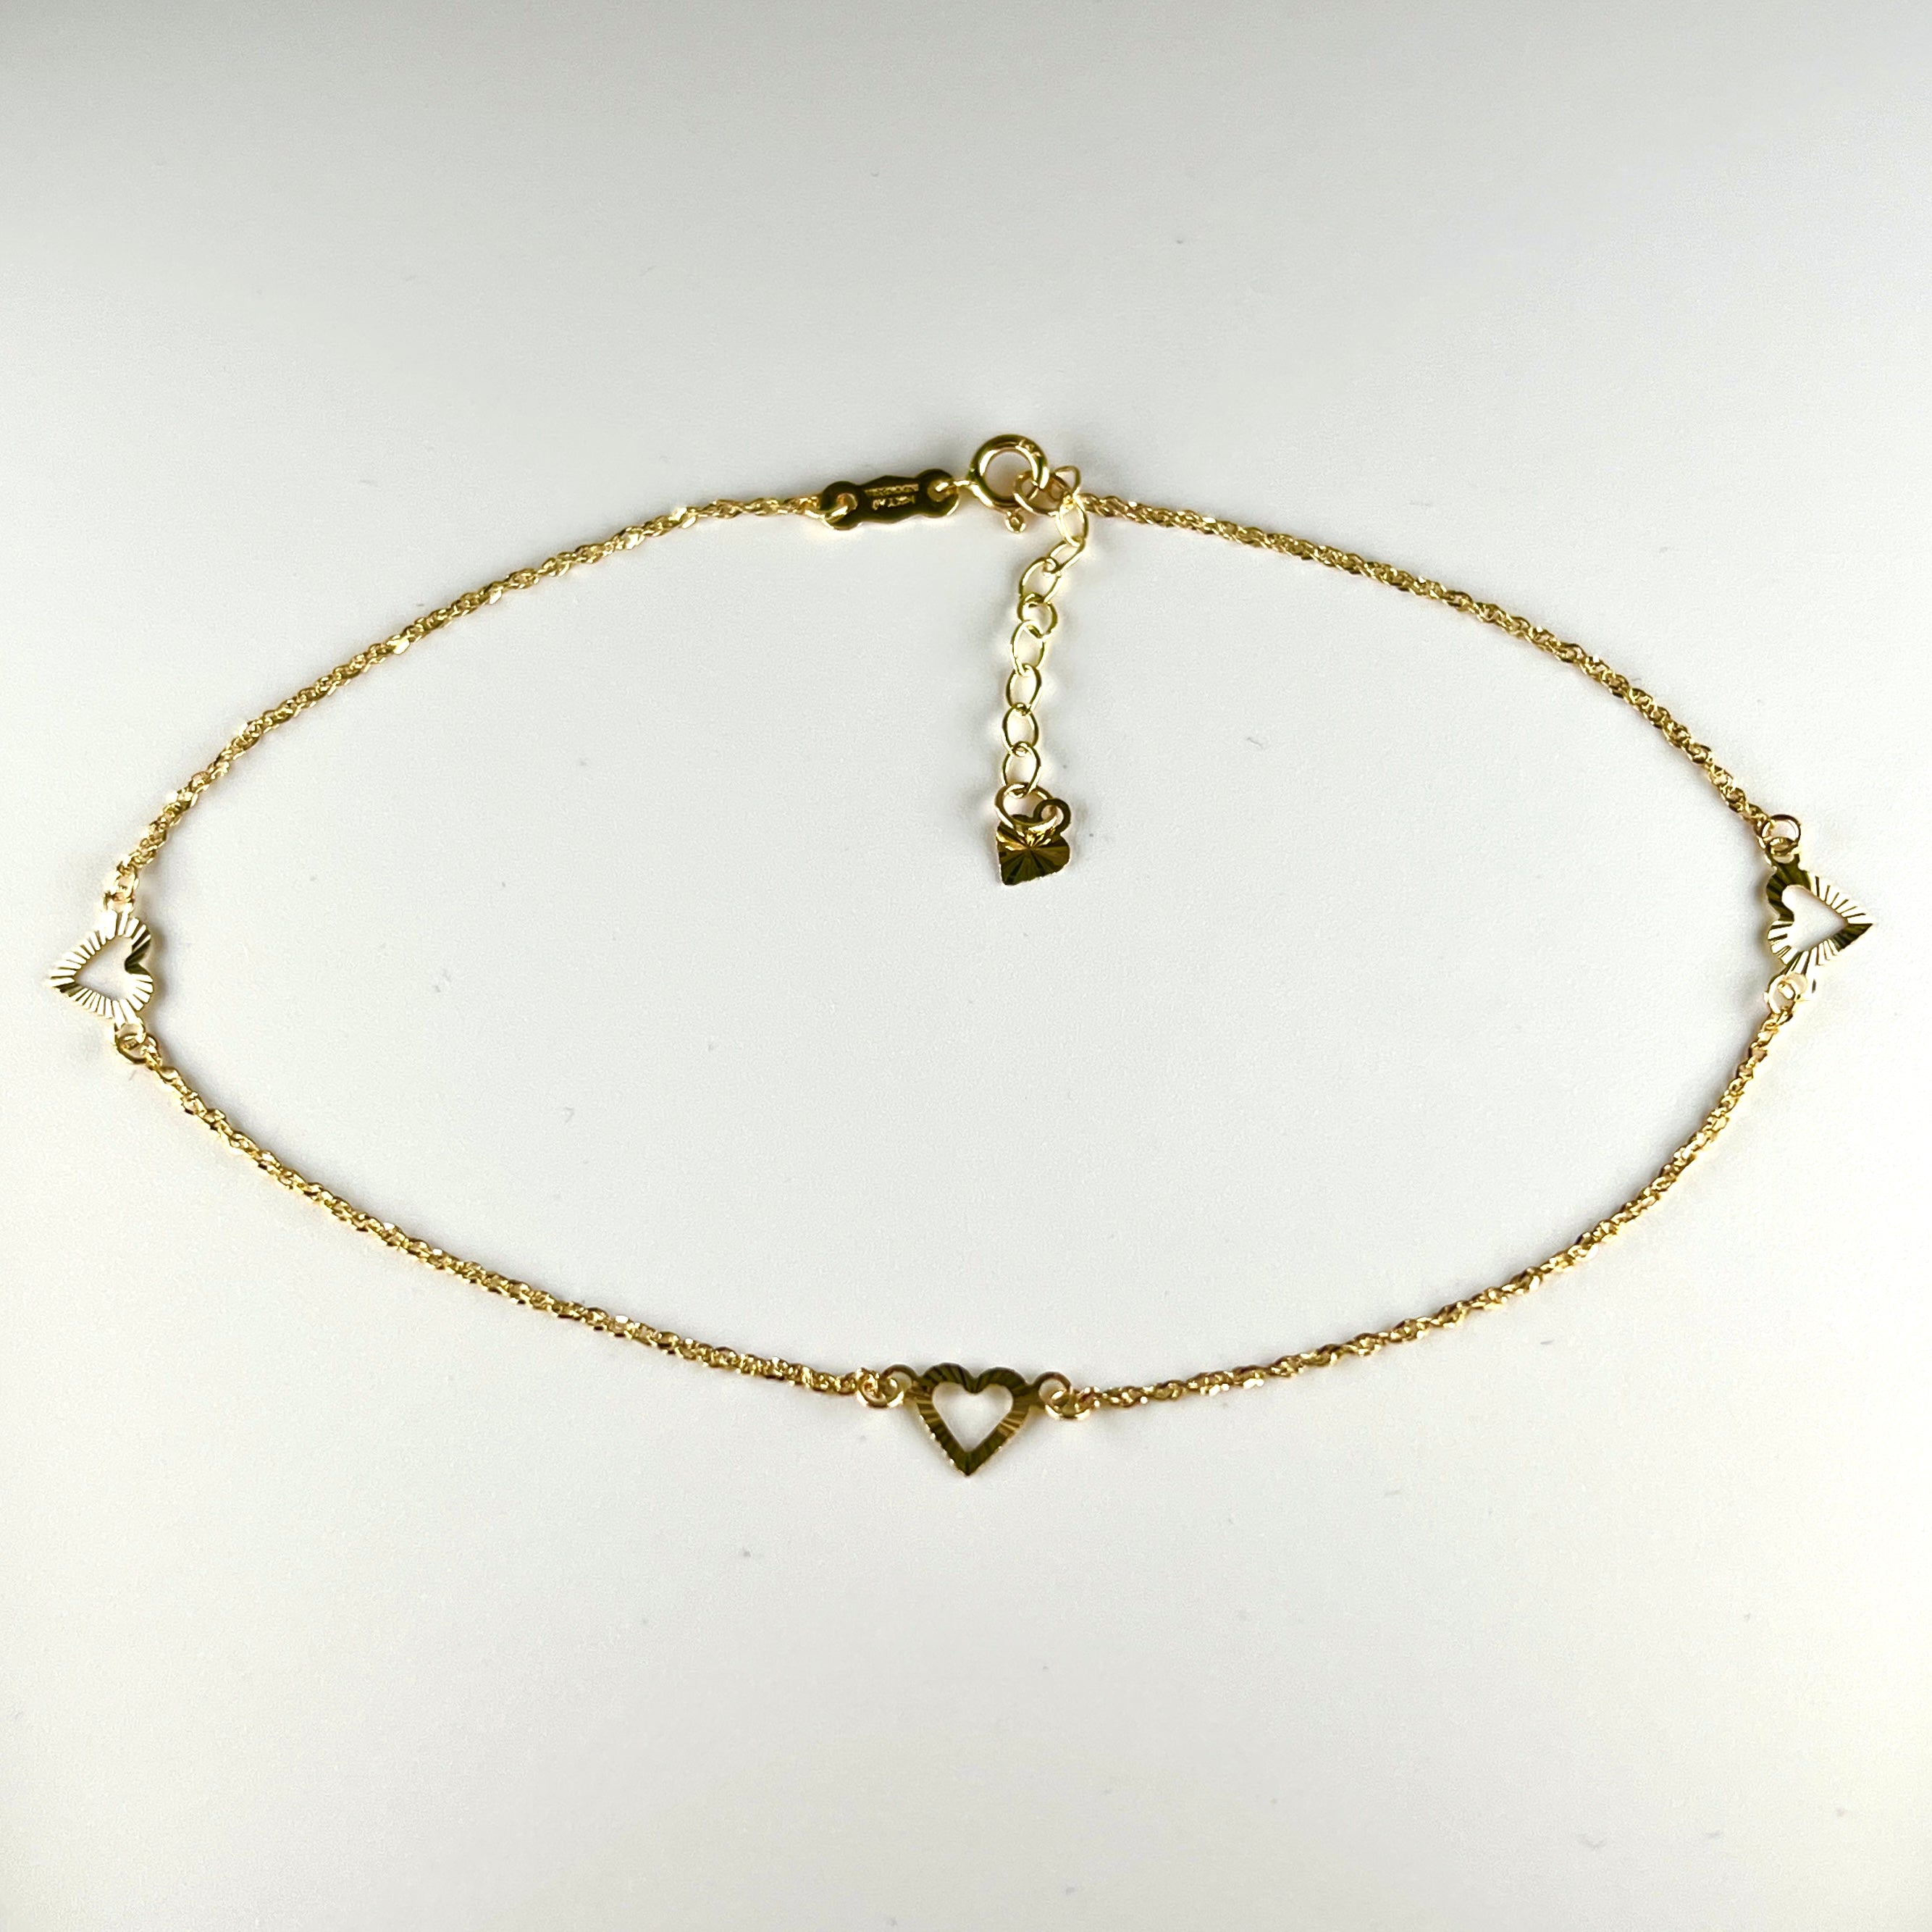 9ct Rose Gold Triple Heart Anklet  9in  G7917  FHinds Jewellers